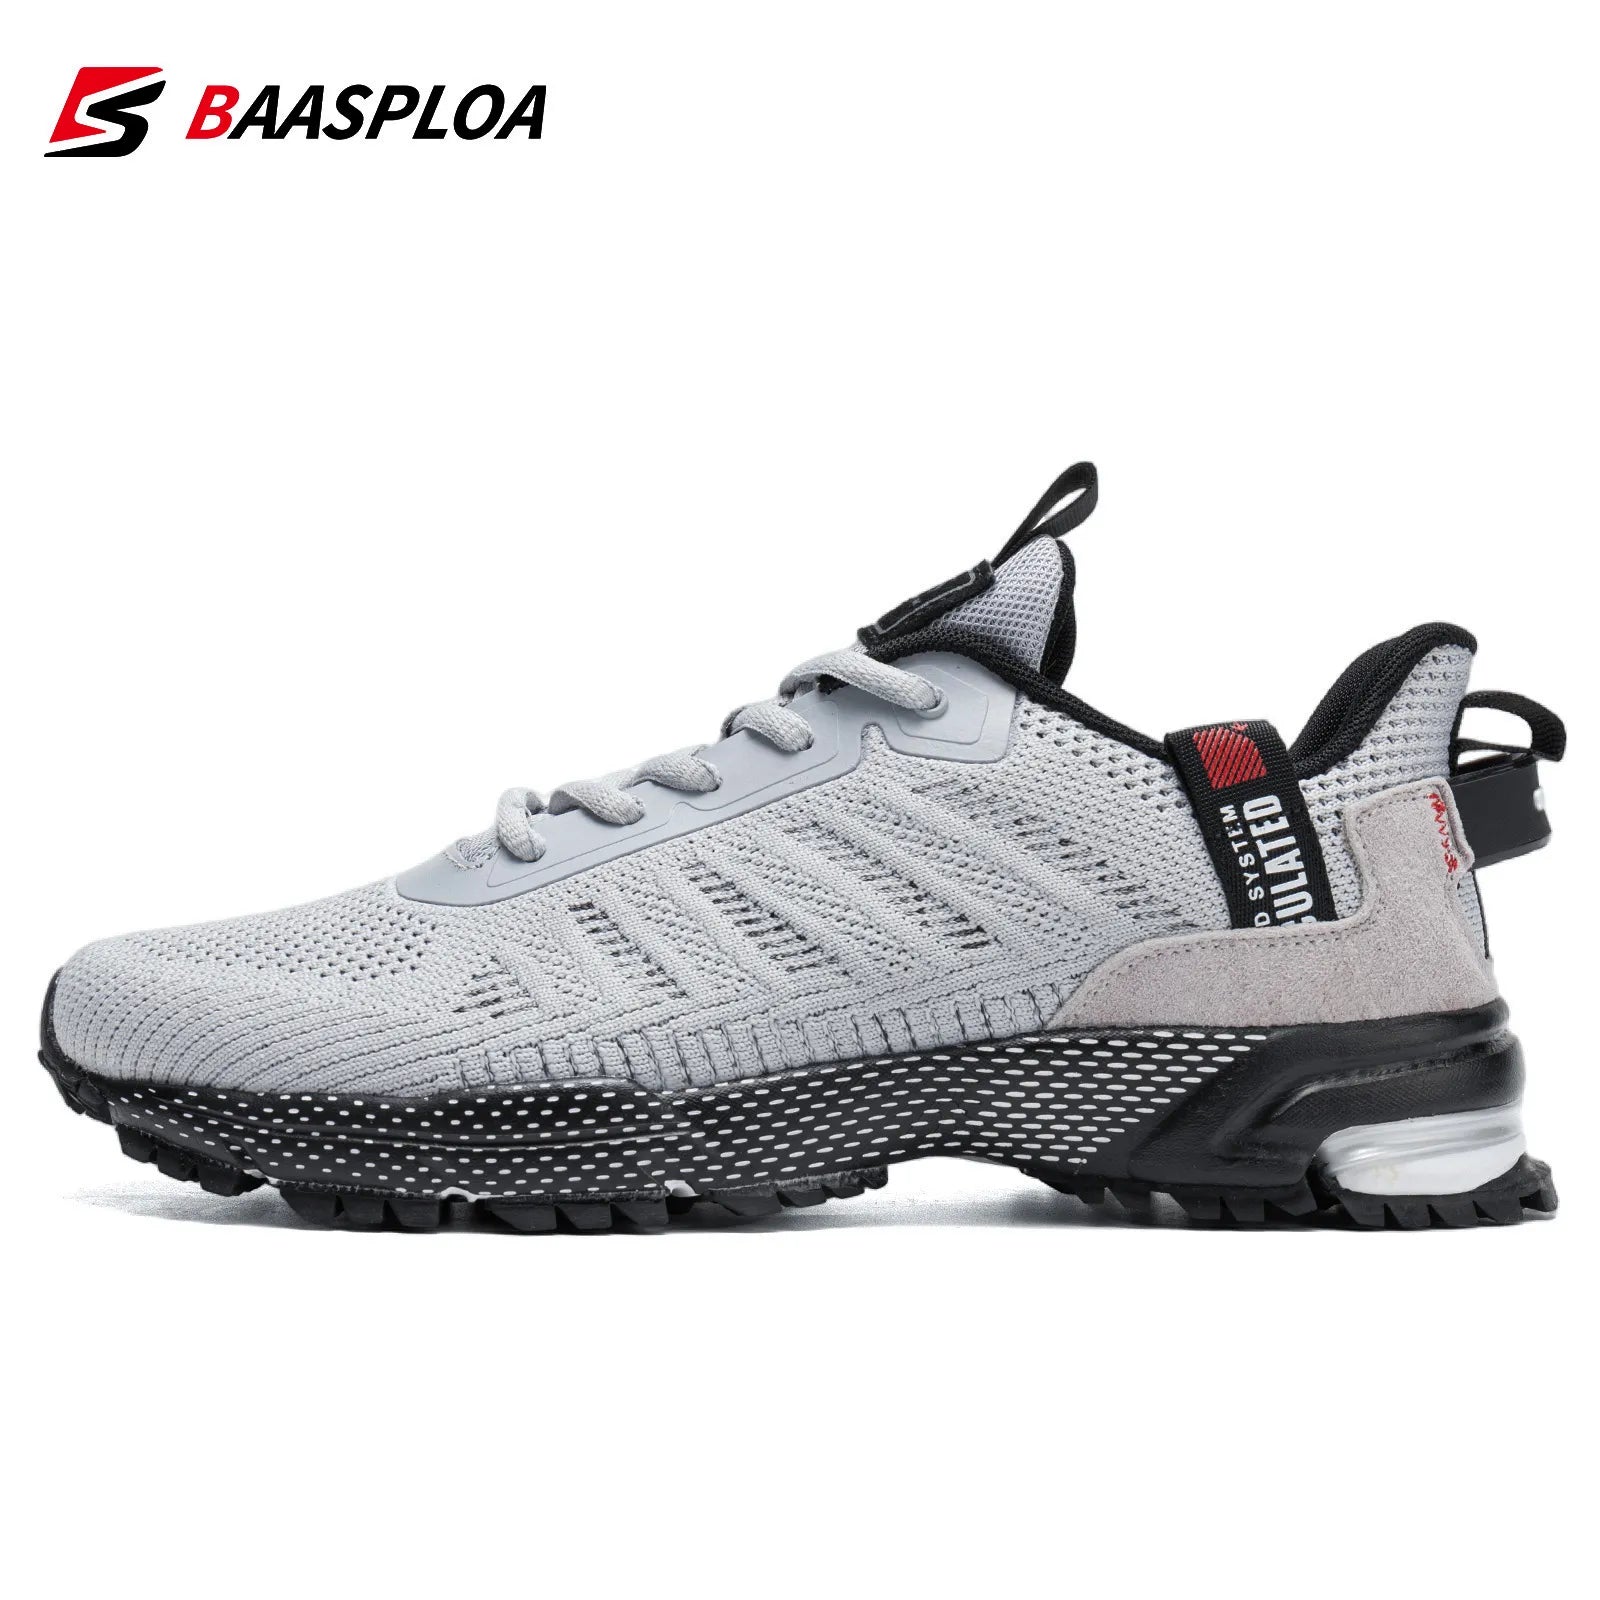 Professional RunningLightweight Designer Mesh Sneakers Lace-Up Male Outdoor Sports Sneakers - TaMNz